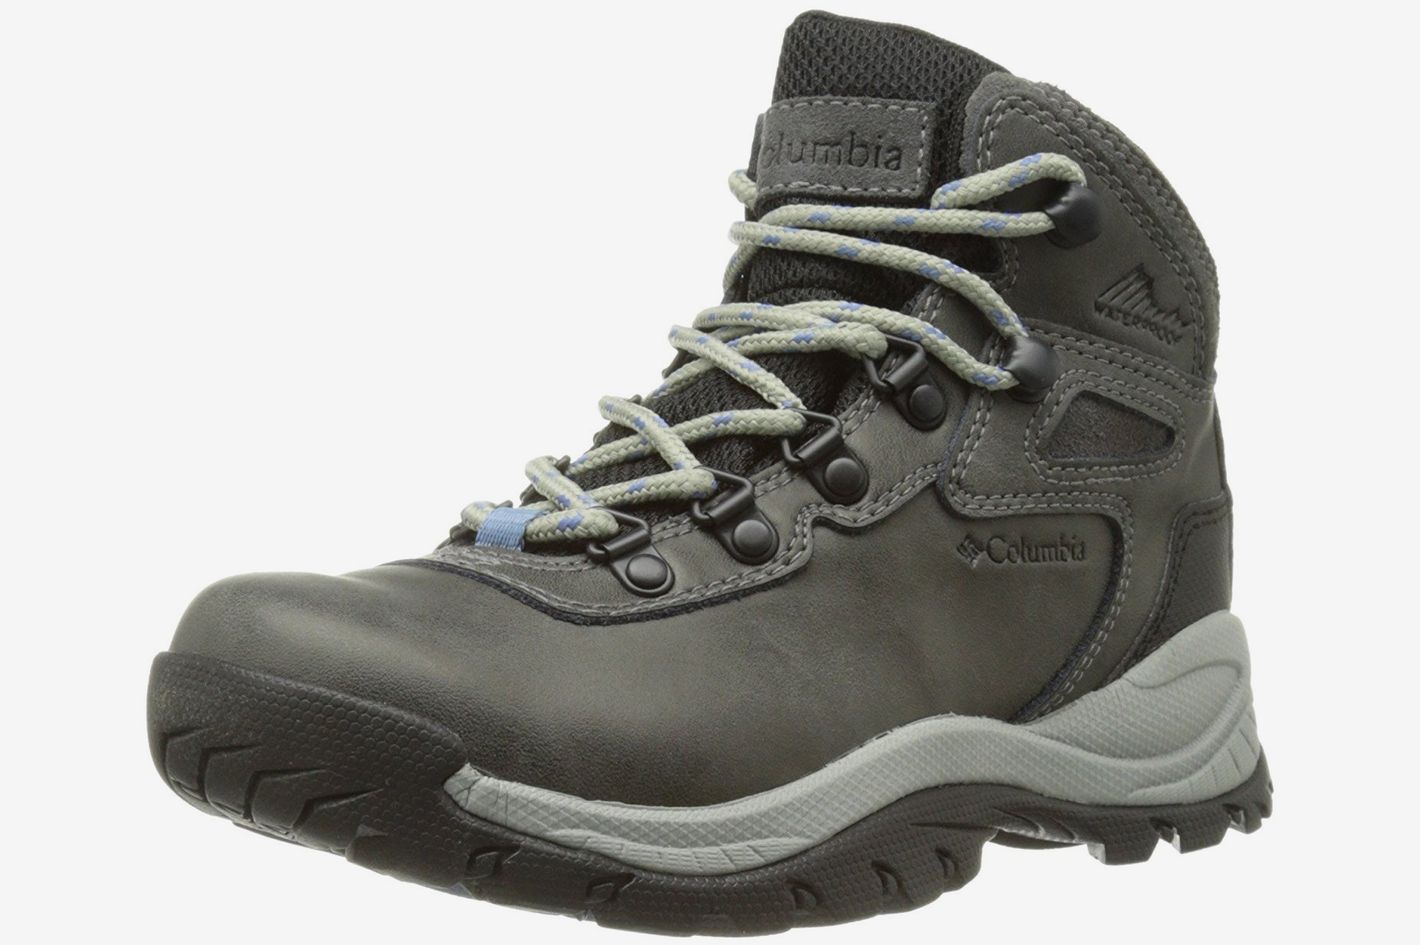 13 Best Hiking Boots for Women 2018